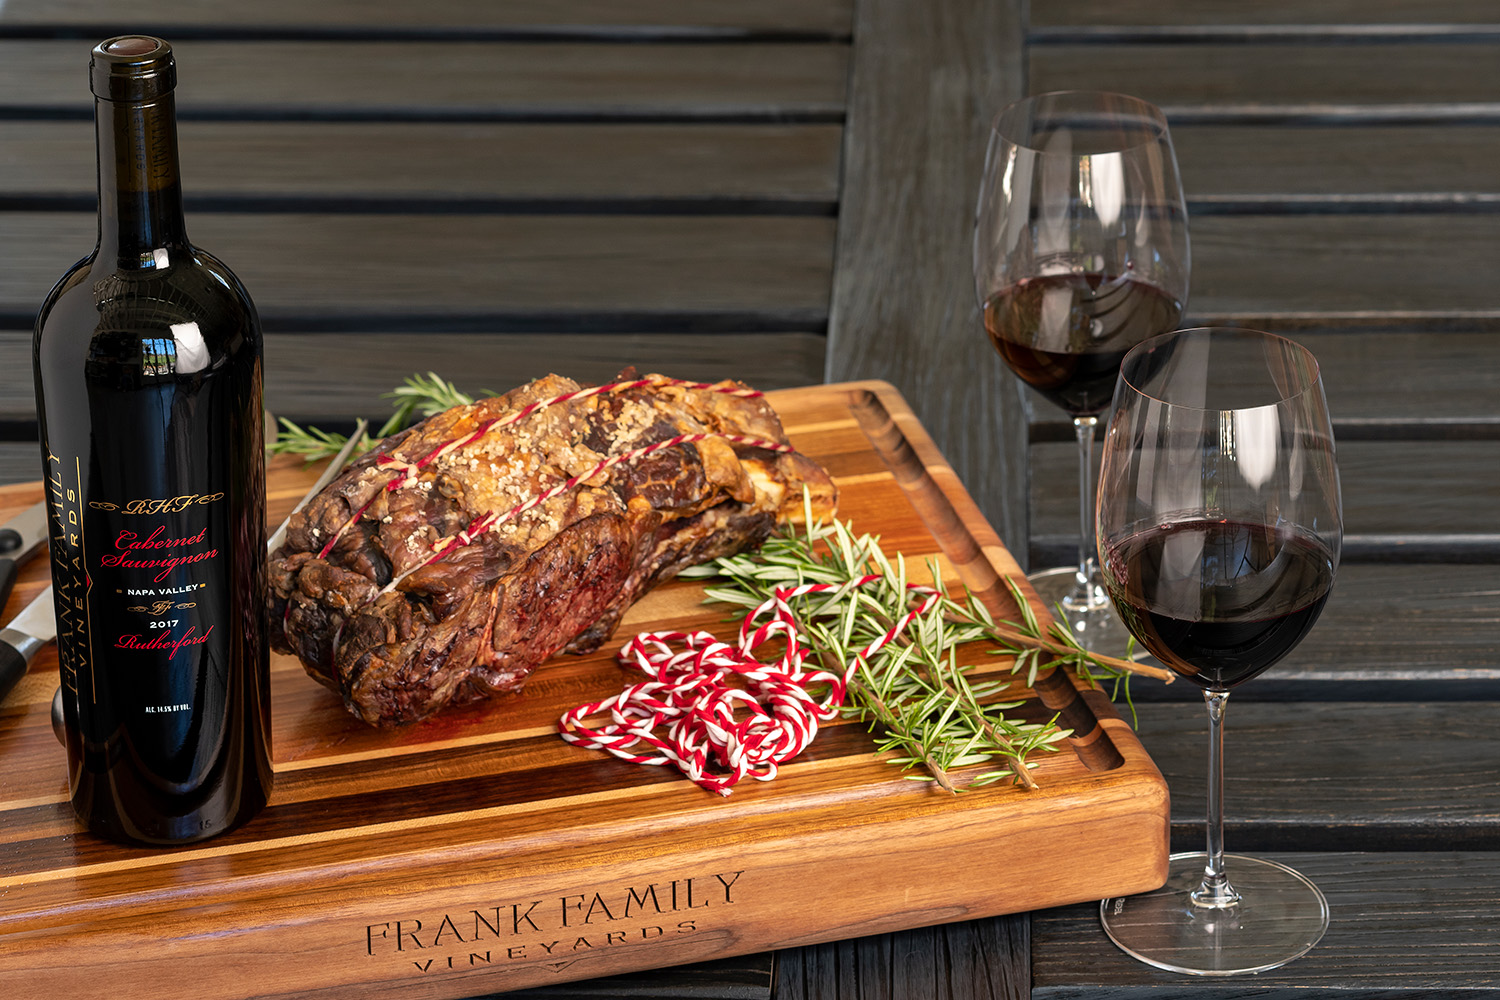 A bottle of Frank Family's RHF Cabernet Sauvignon next to a rib roast and two wine glasses